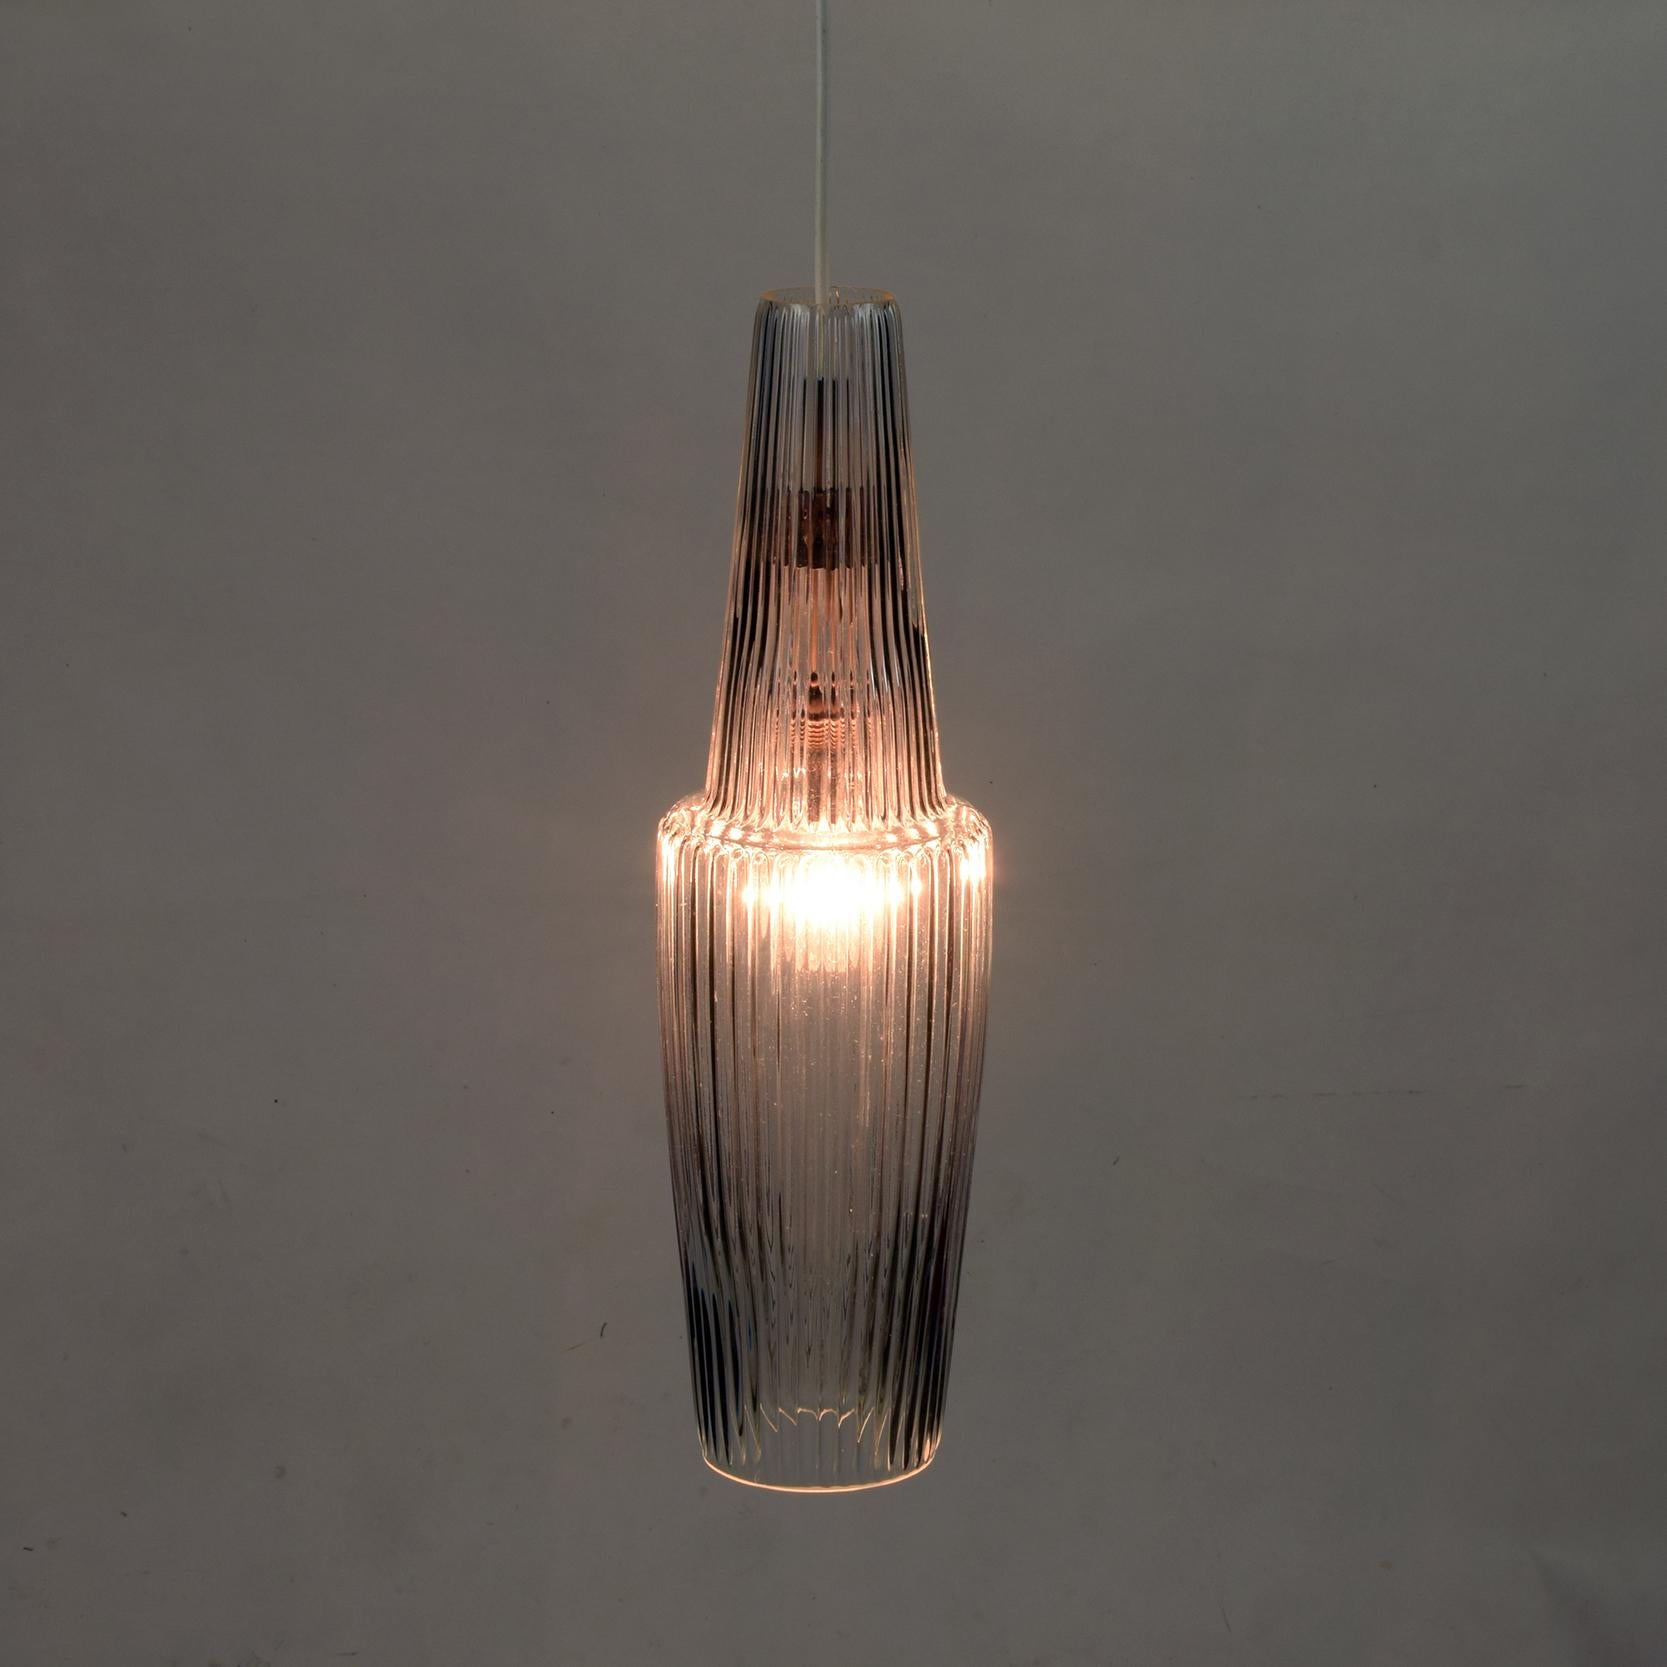 Aloys Ferdinand Gangkofner (Designer).
Peill and Putzler (manufacturer)
Glass ceiling pendant lamp, circa 1950s.

A stunning, elegant lamp, giving out a pleasing, diffused light.

Clear glass with brass fitting.
Standard E27 screw-type